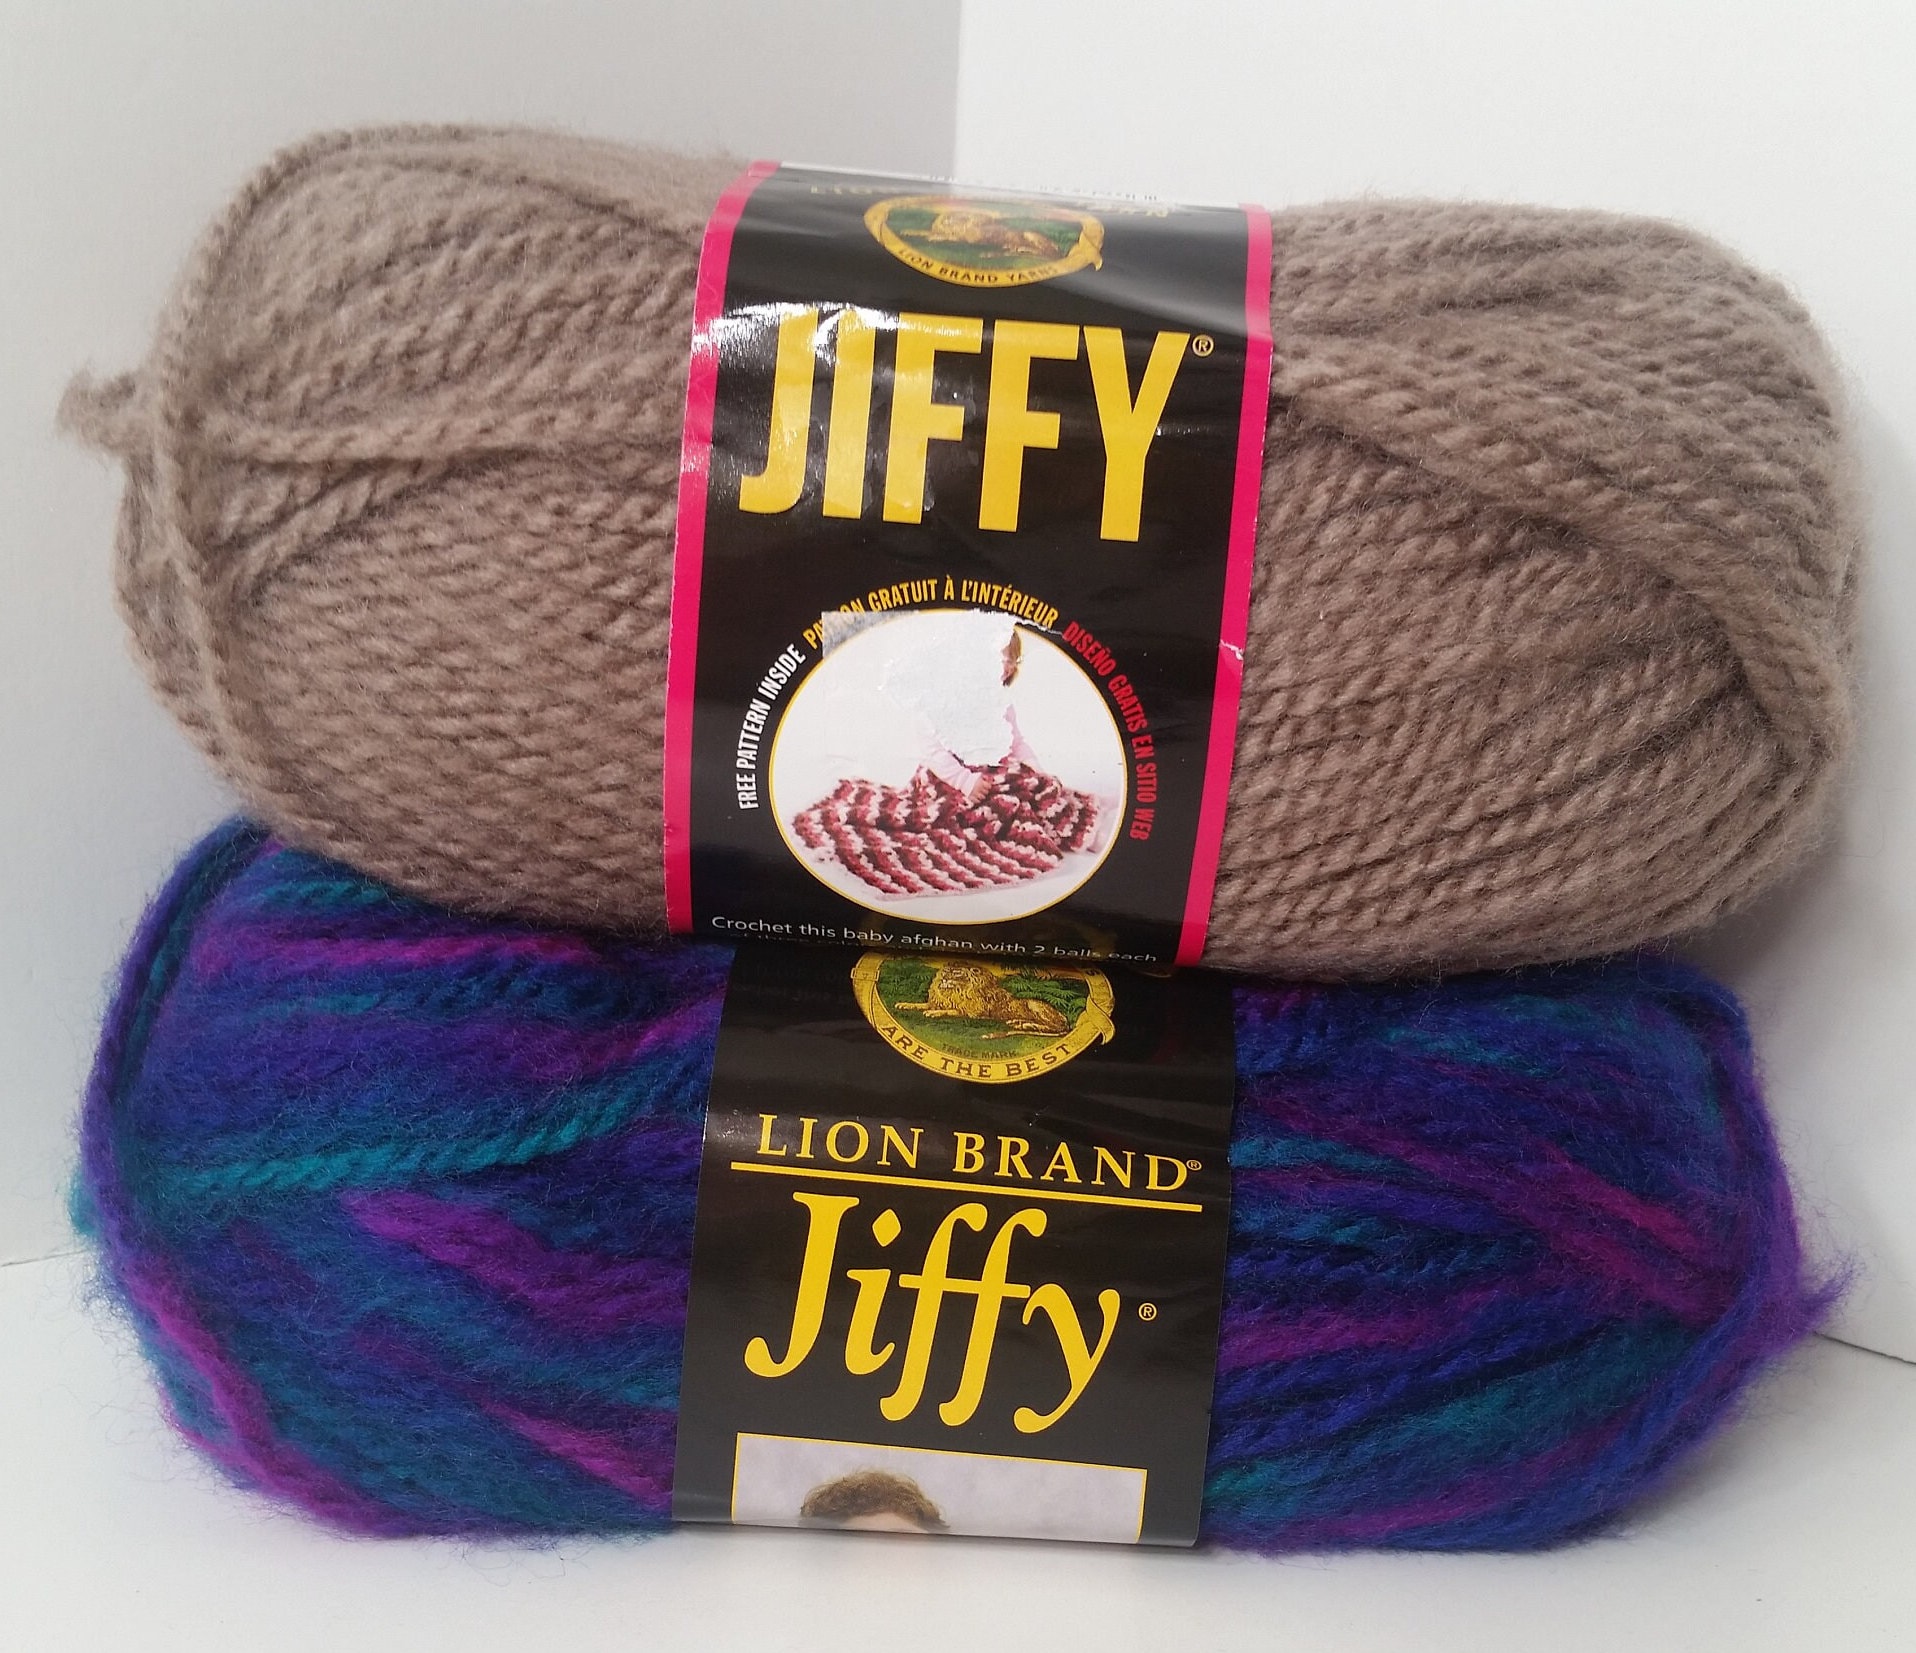 1 Skein 8 Skeins Available From 2 Colors Lion Brand Jiffy Yarn, Mohair-look  Yarn, Machine Wash/dry 